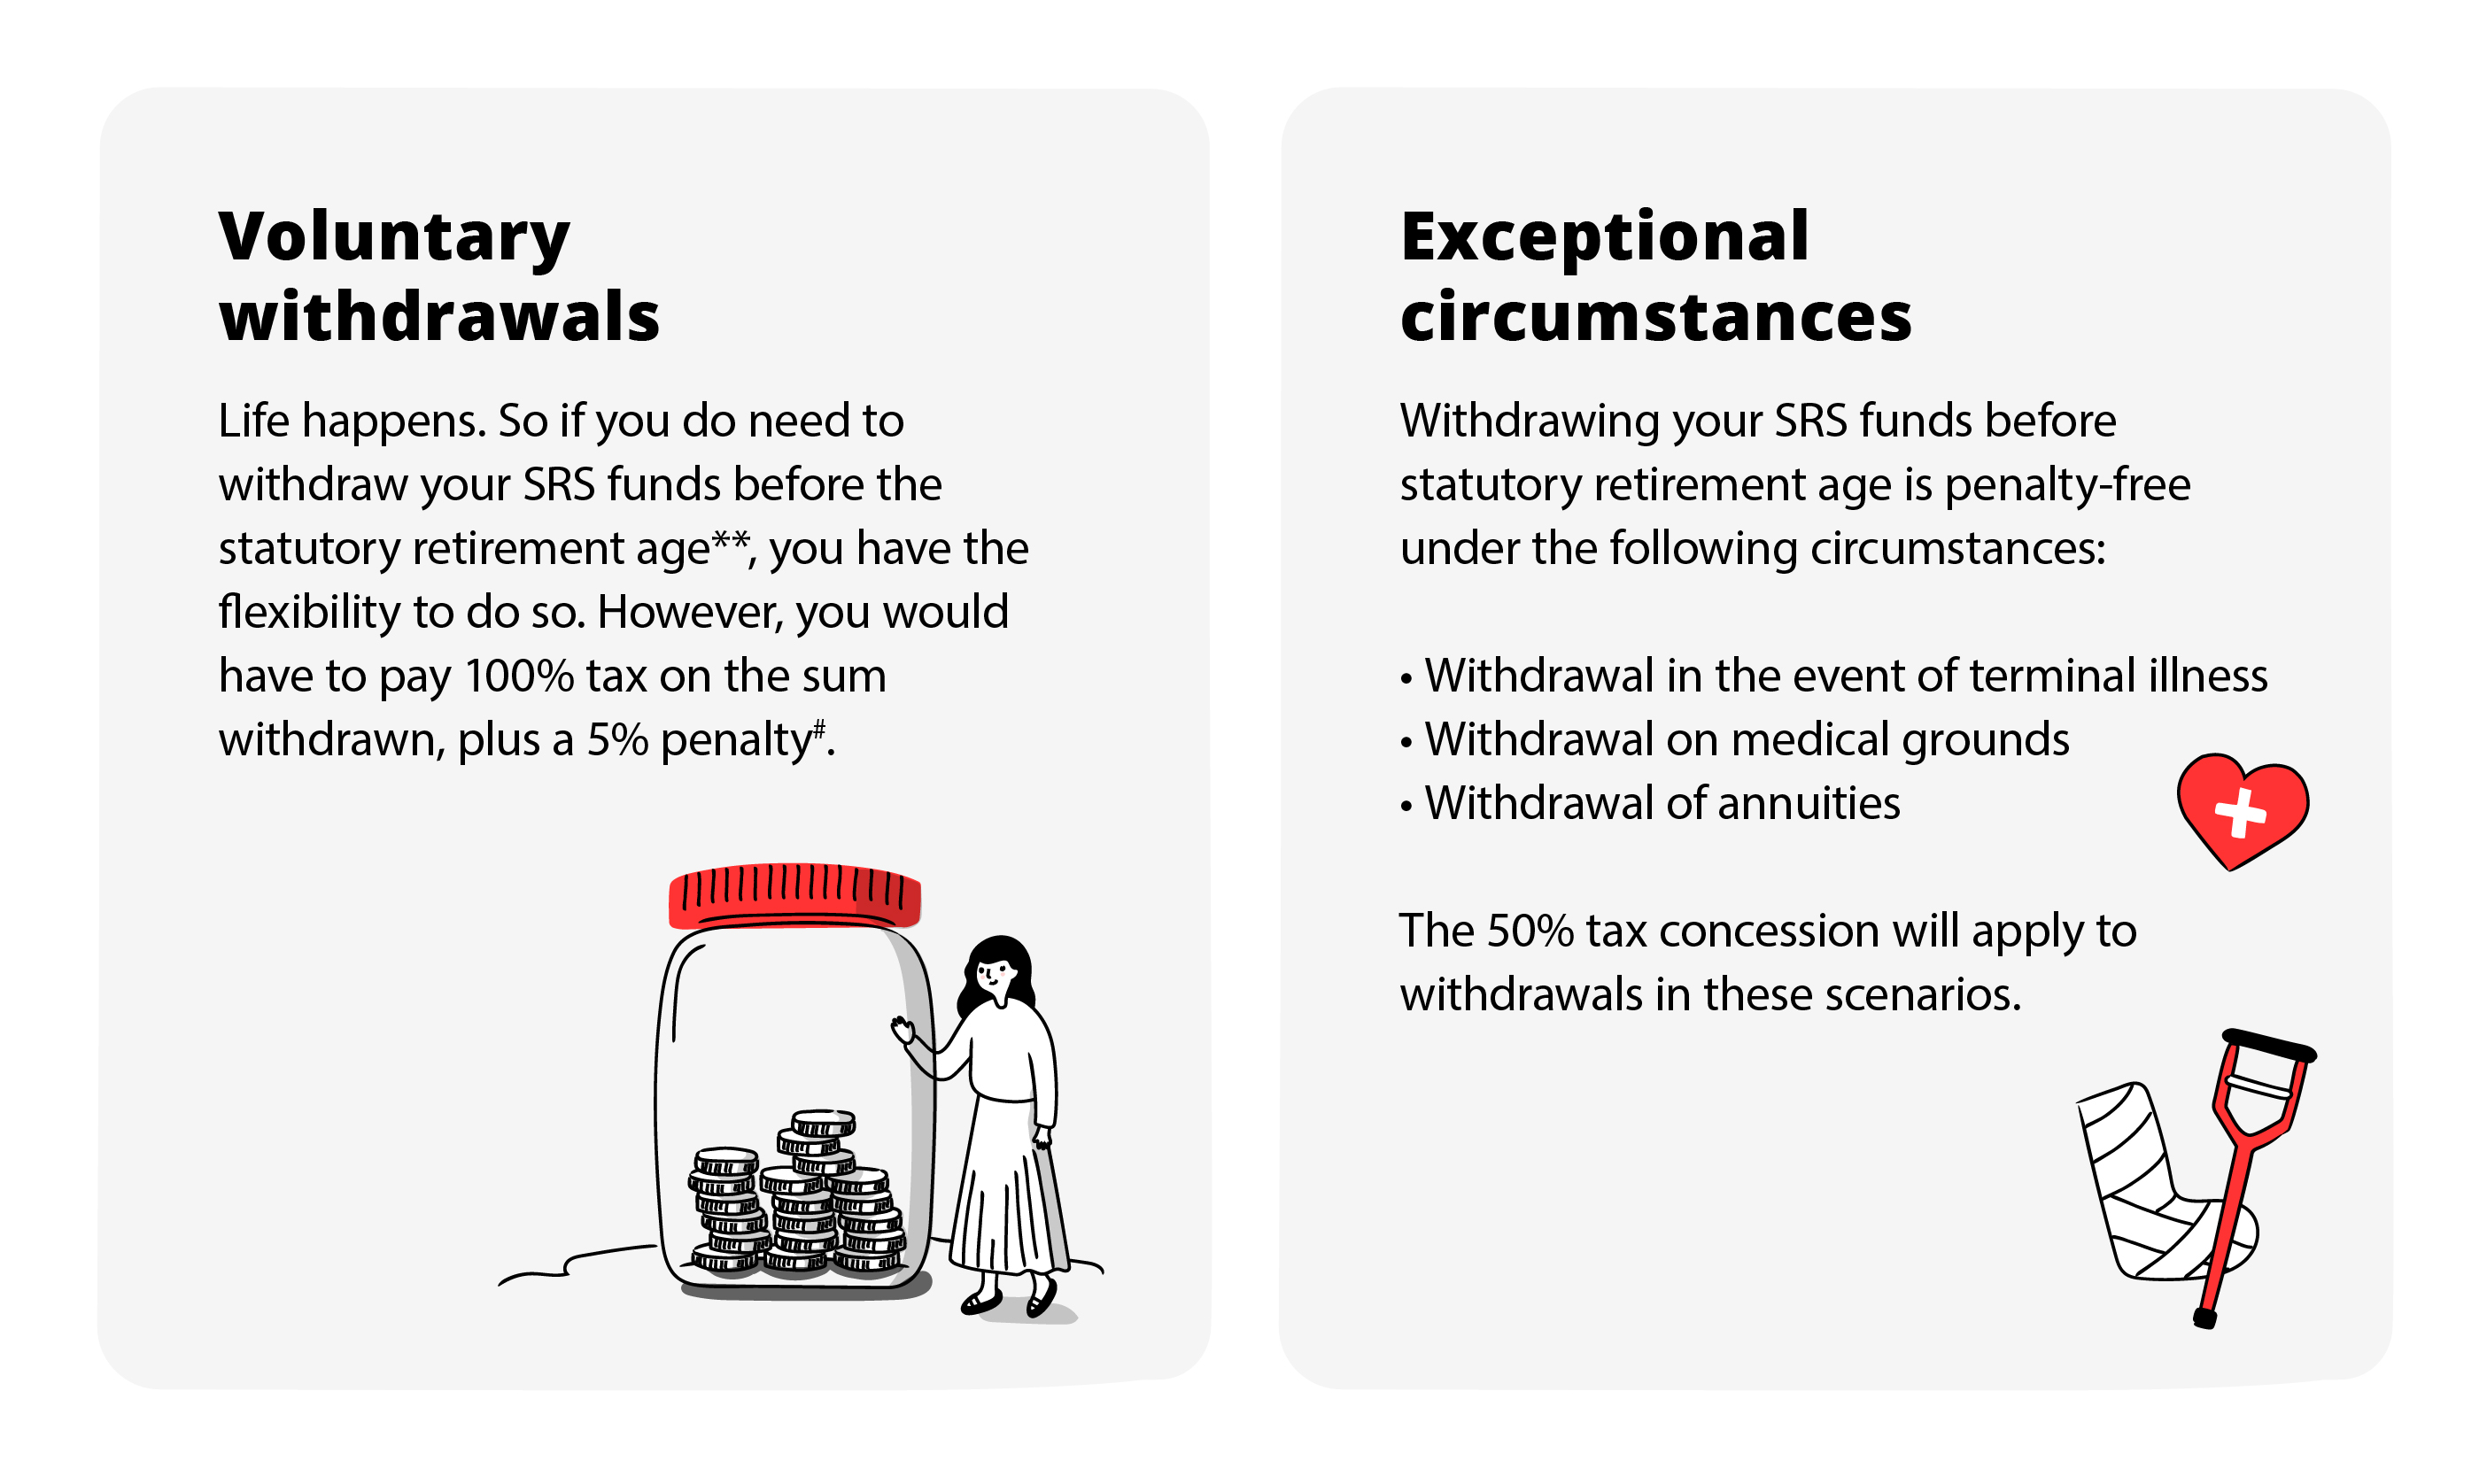 Voluntary withdrawals and Exceptional circumstances